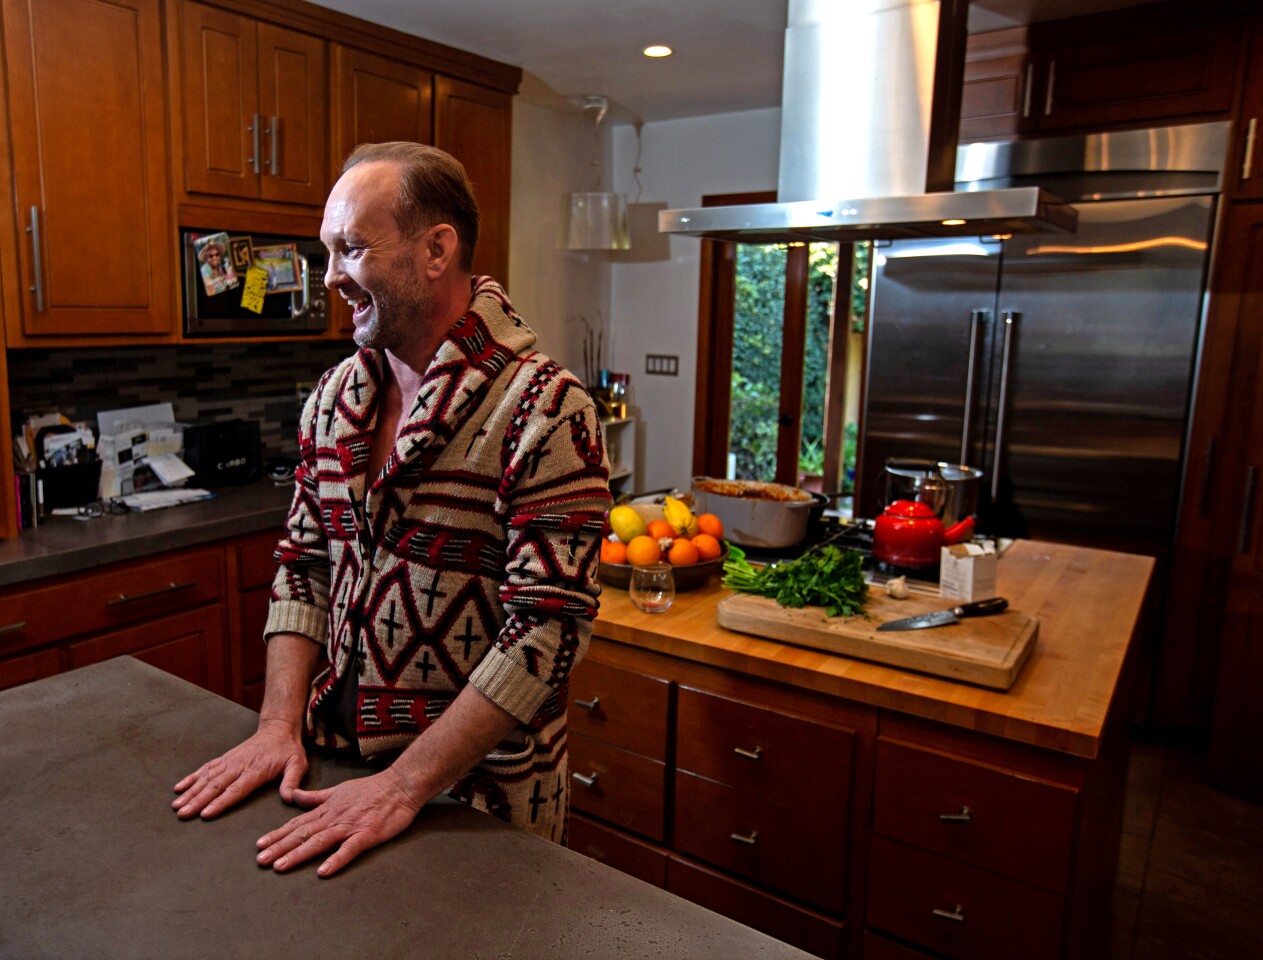 Los Angeles, CA., January 15, 2020: Andrew Howard cooks in his kitchen on Wednesday, January 15, 2020 in Los Angeles, California. Howard stars on the HBO series, "Watchmen," and in the upcoming HBO limited series, "Perry Mason." currently filming, as well as Christopher Nolan’s new film, "Tenet."(Jason Armond / Los Angeles Times)